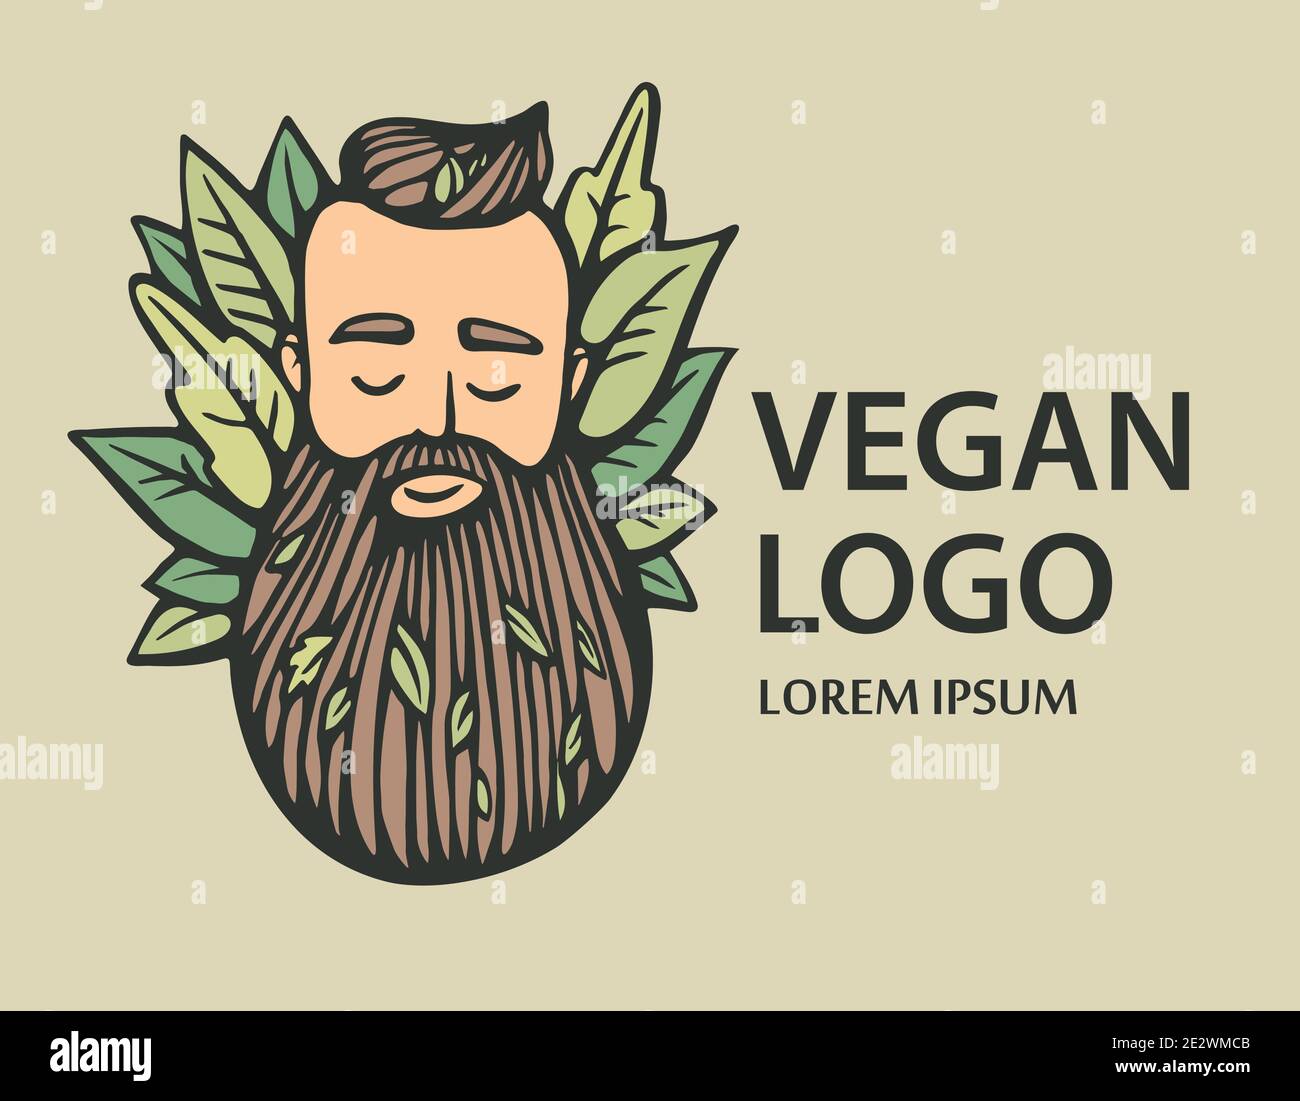 https://c8.alamy.com/comp/2E2WMCB/eco-nature-logo-hipster-head-with-blooming-beard-with-leafs-on-white-background-hand-drawn-vector-illustration-bearded-man-emblem-for-eco-products-2E2WMCB.jpg